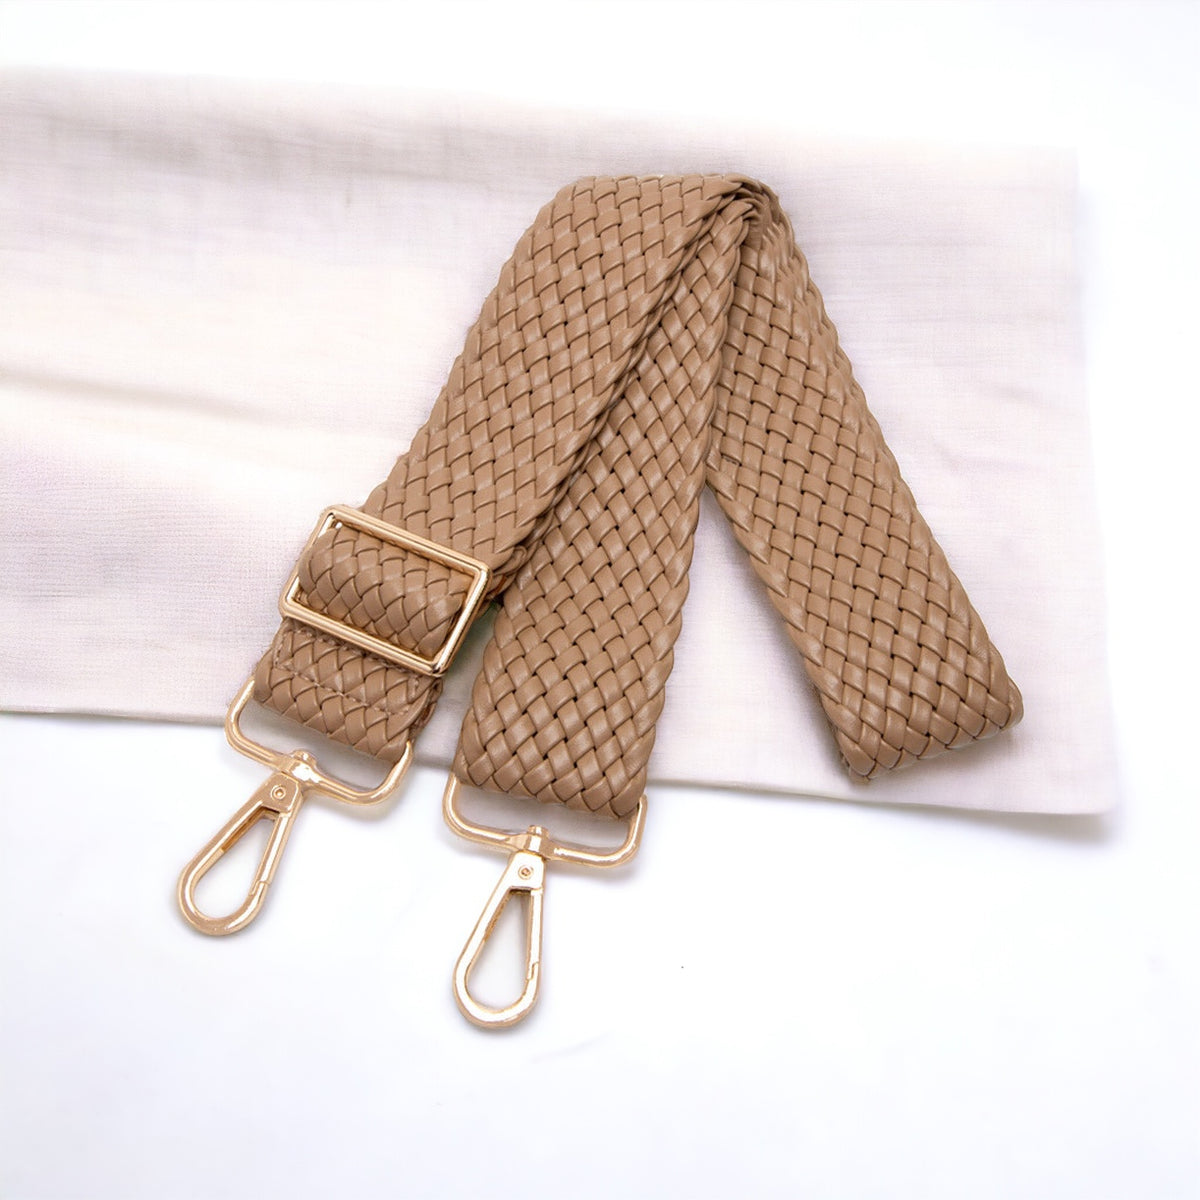 Faux Leather Braided Bag Strap - Camel-260 Other Accessories-Wona Trading-Coastal Bloom Boutique, find the trendiest versions of the popular styles and looks Located in Indialantic, FL